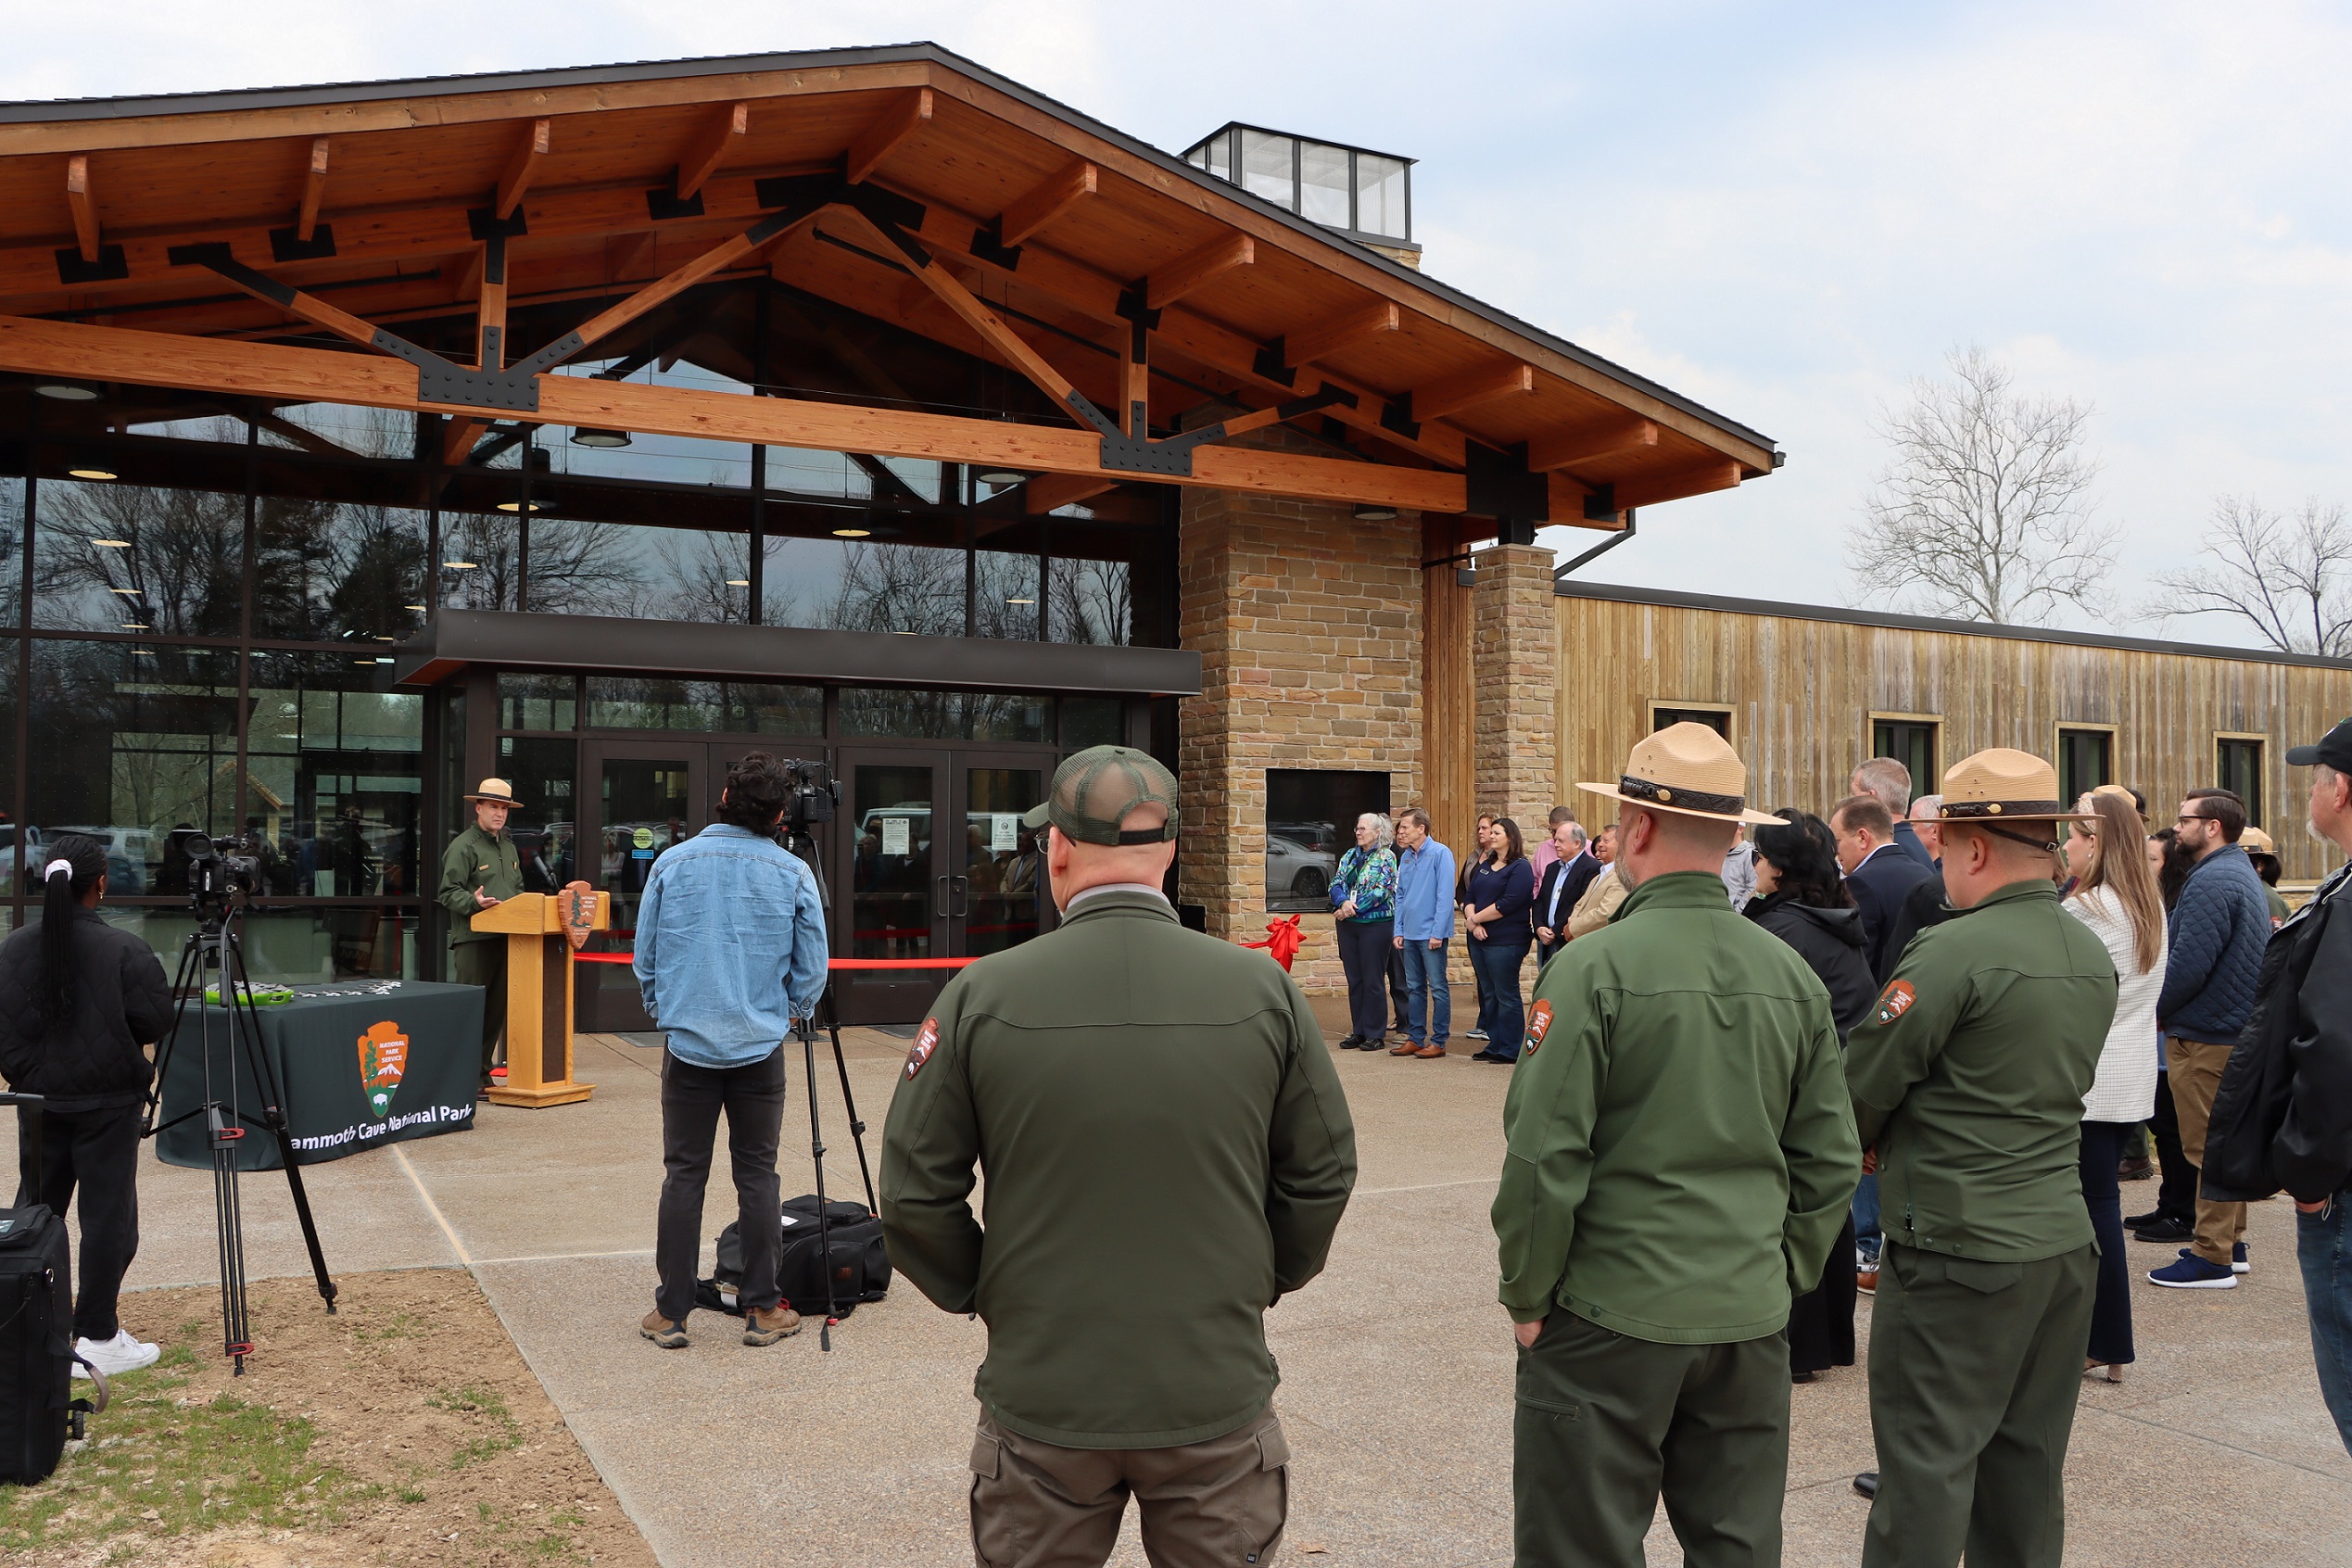 The Park Superintendent addresses a crowd of people from a podium in front of the renovated Mammoth Cave Lodge